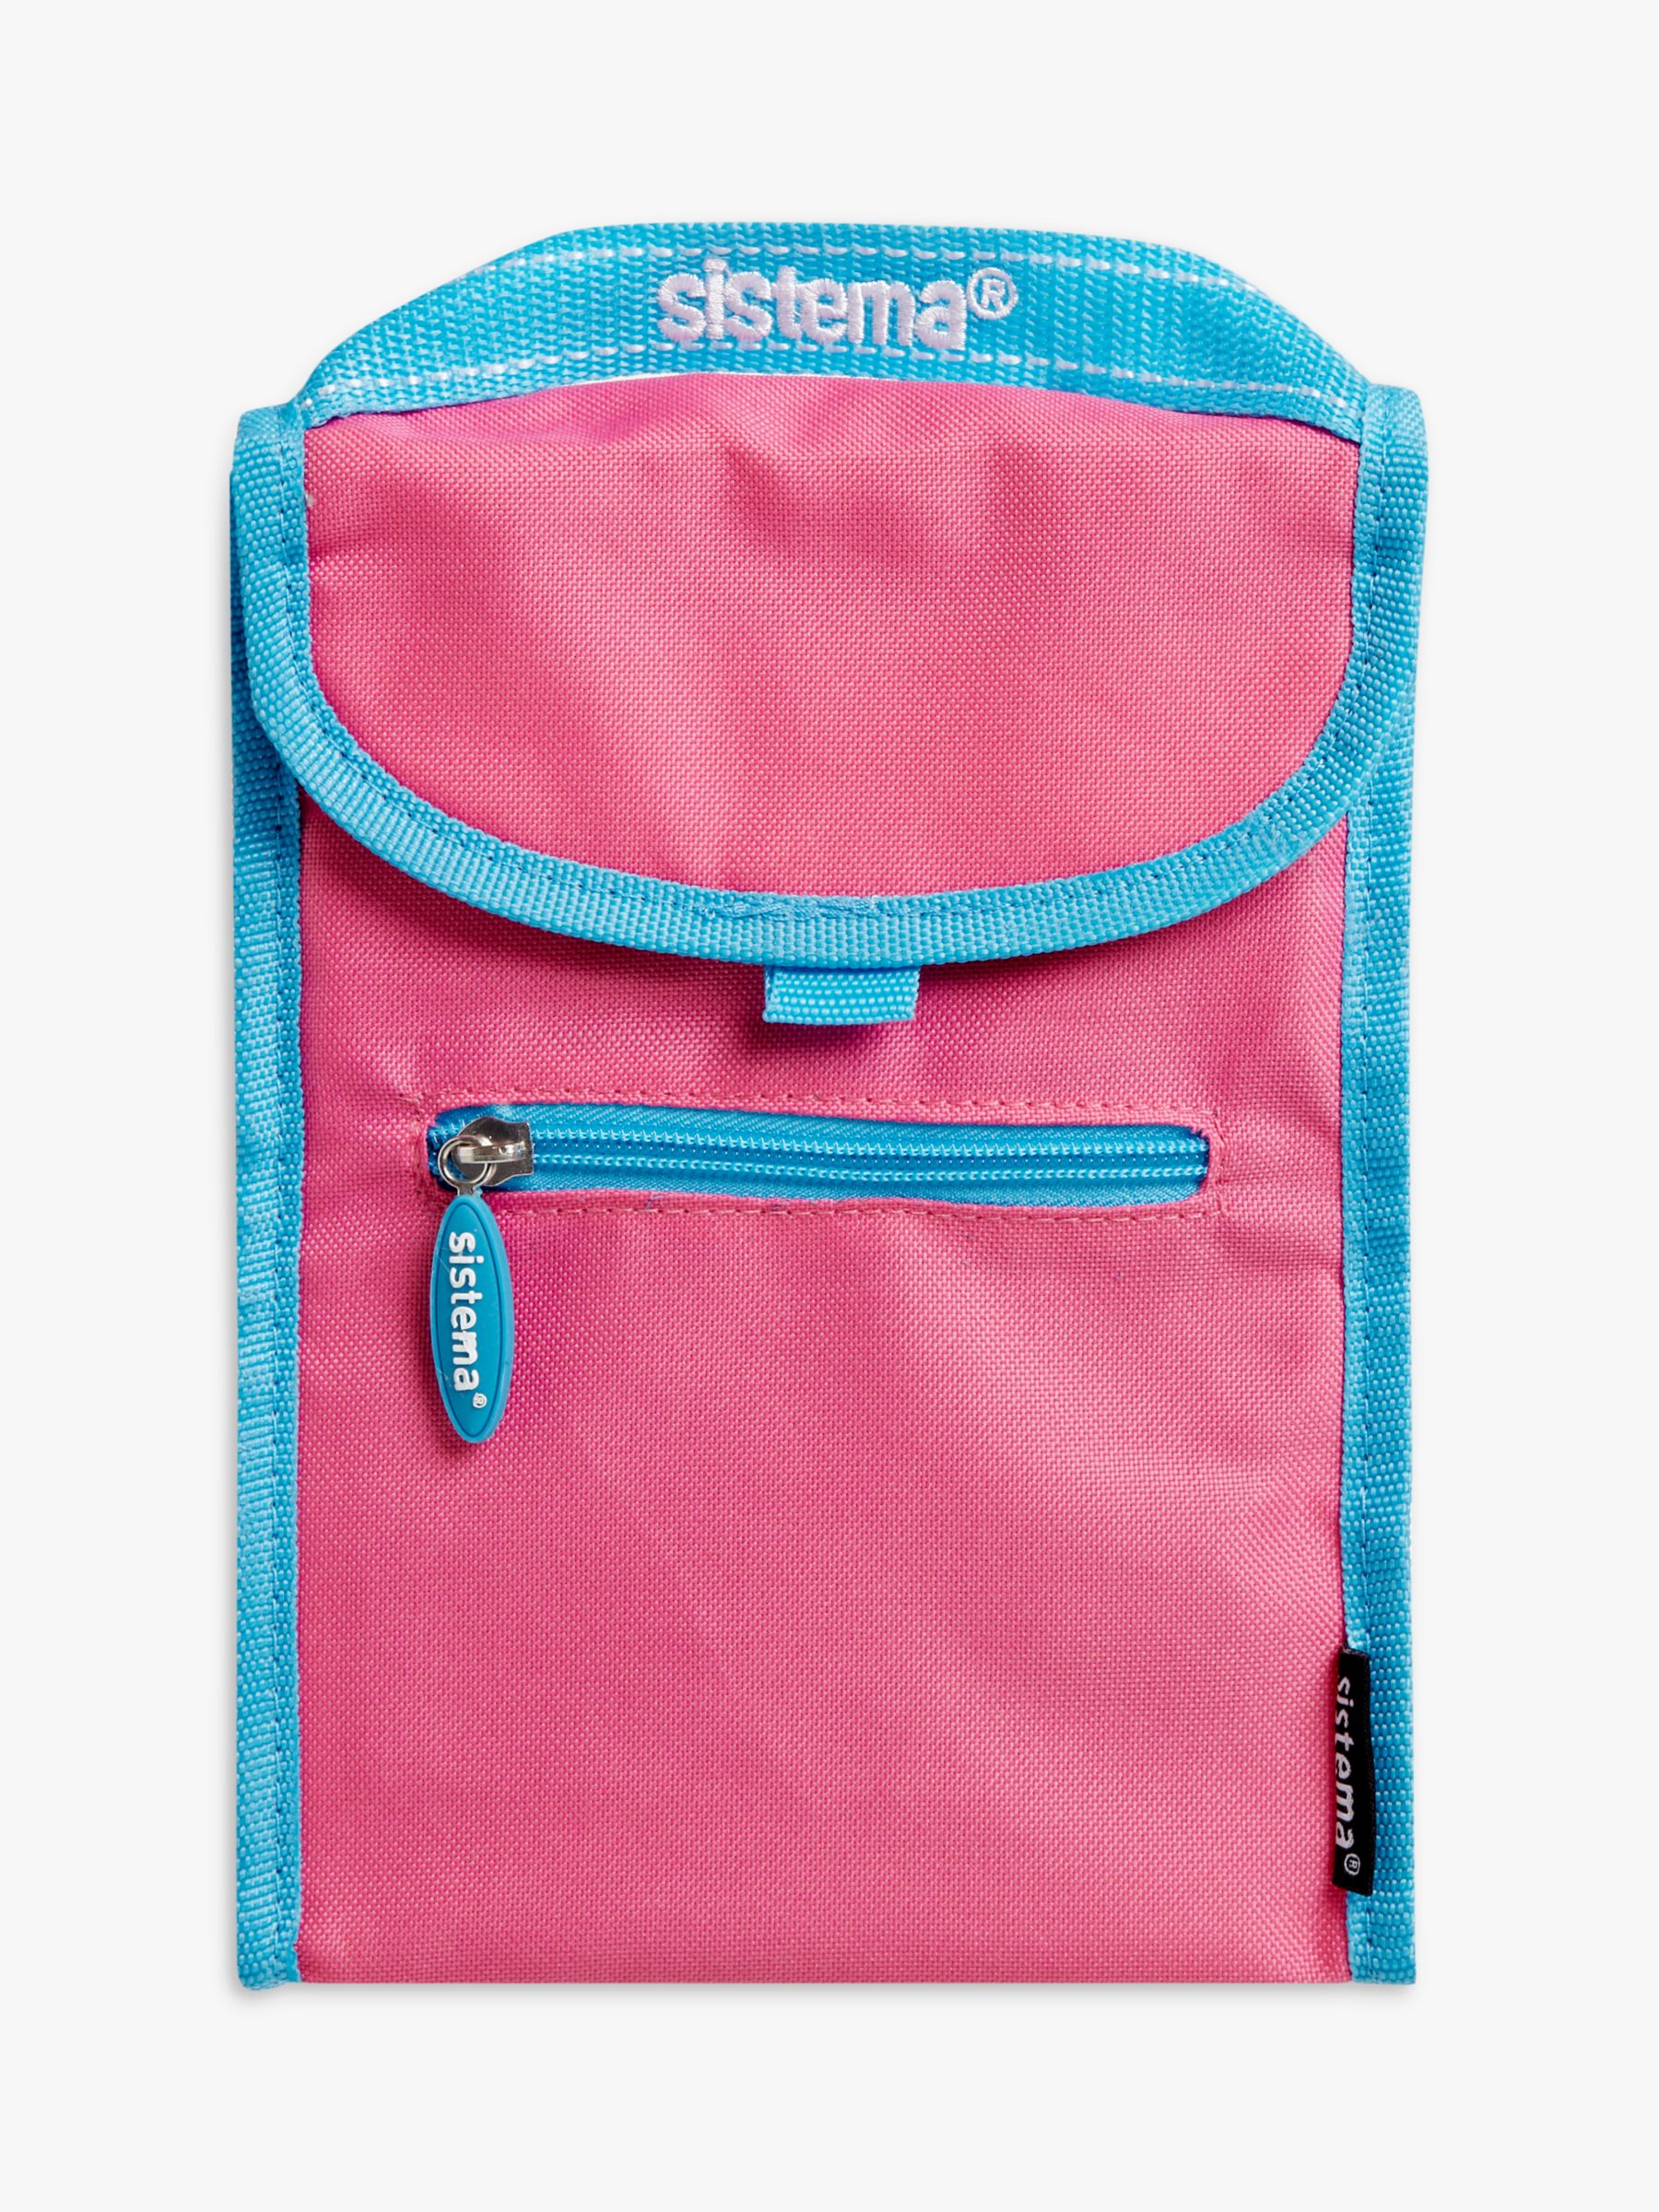 Sistema Lunch To Go Lunch Bag, Assorted at John Lewis & Partners